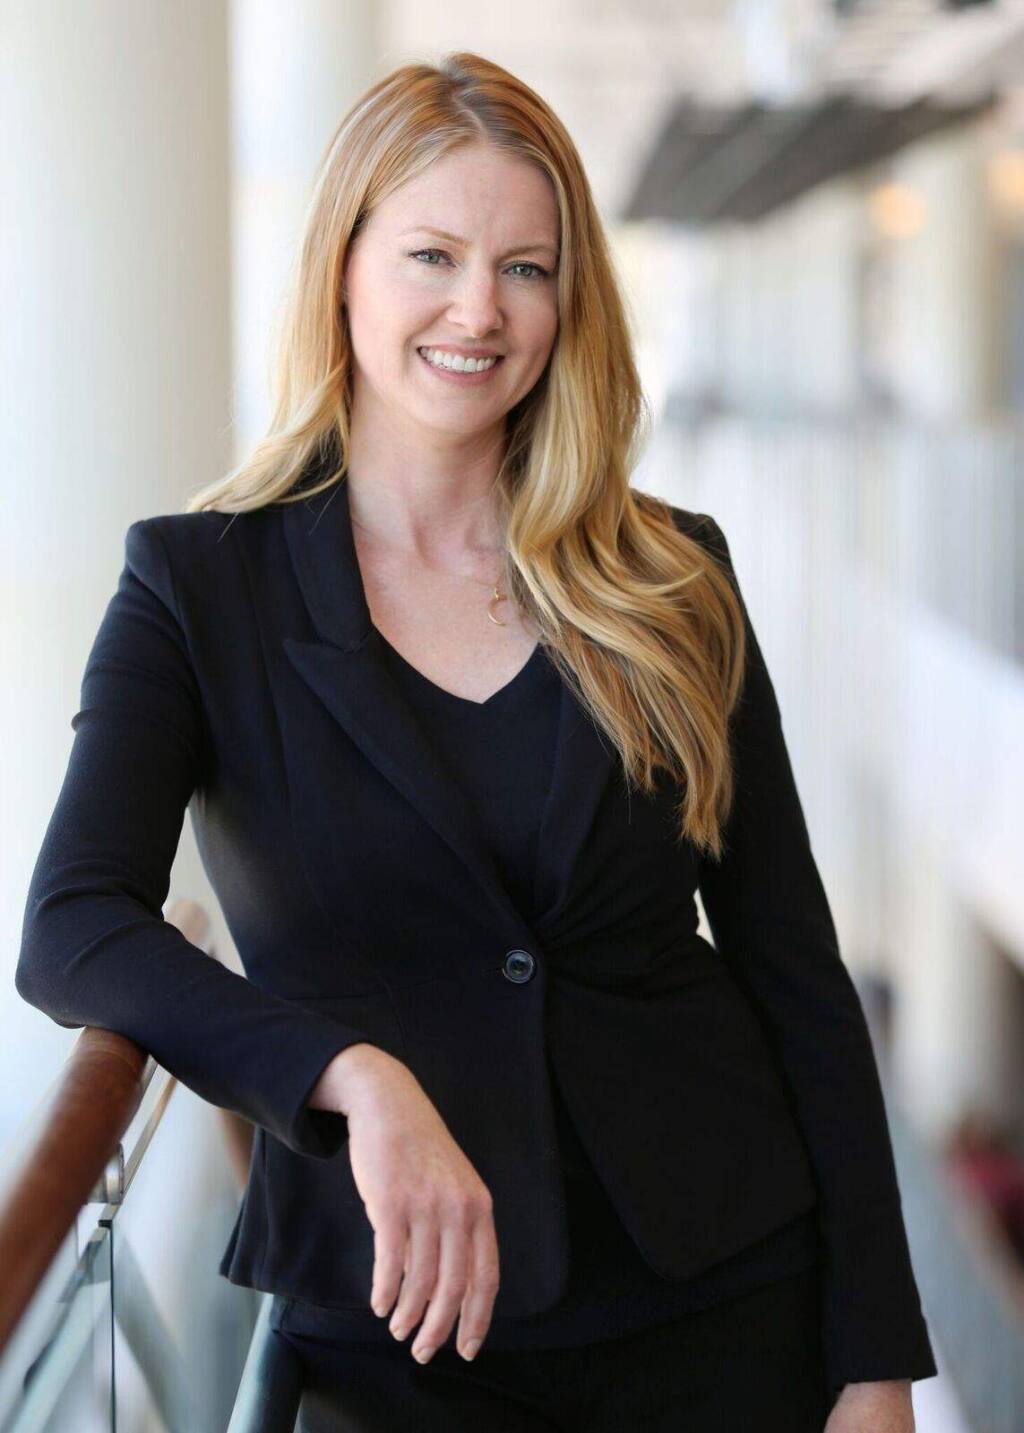 Lisa Lichty, CEO, Star Staffing, Petaluma, is a 2019 winner of North Bay Business Journal's Women in Business Awards. (courtesy photo)